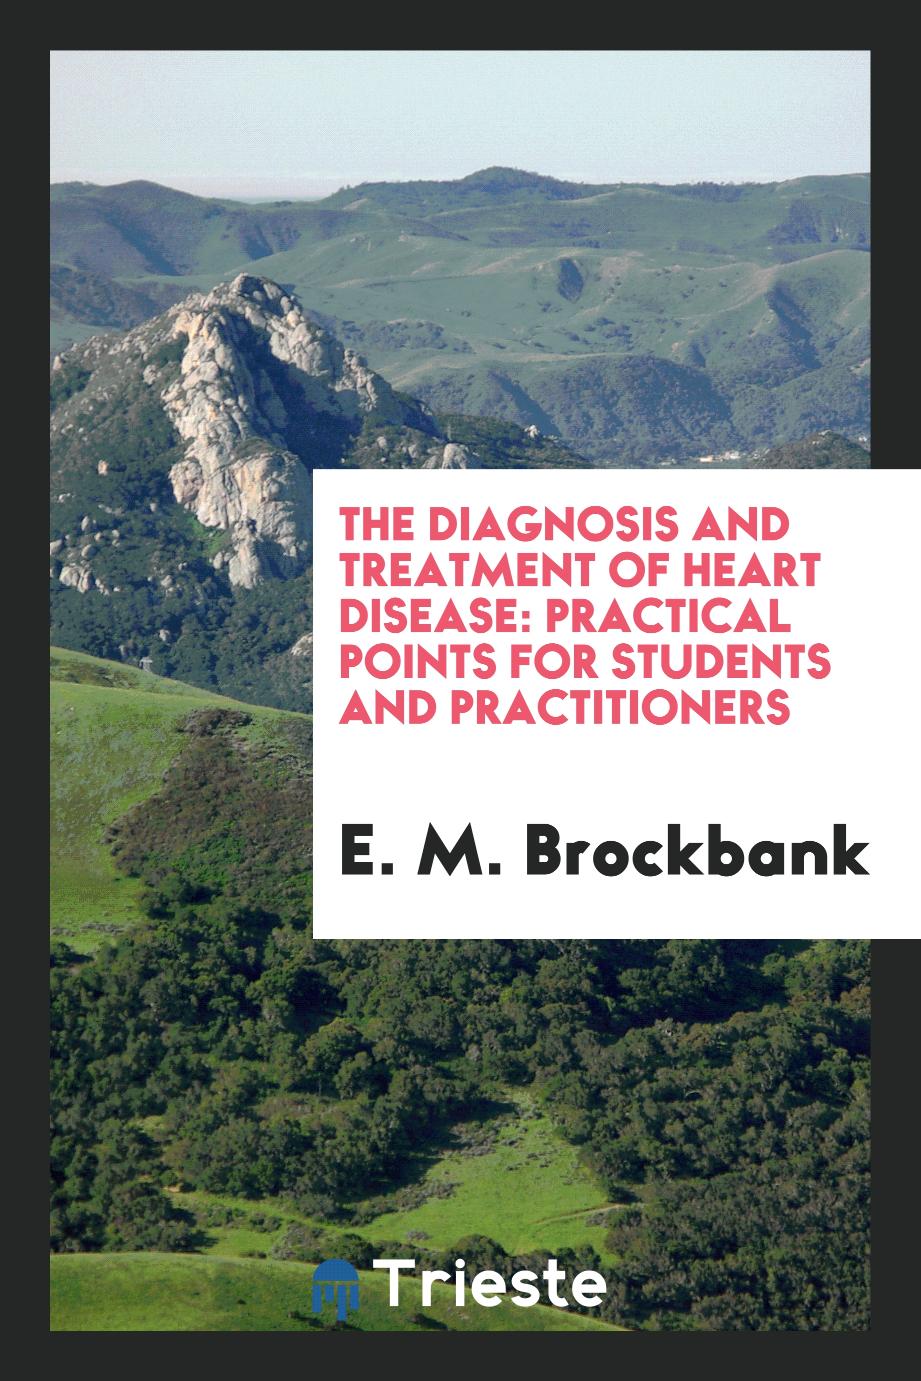 E. M. Brockbank - The Diagnosis and Treatment of Heart Disease: Practical Points for Students and Practitioners